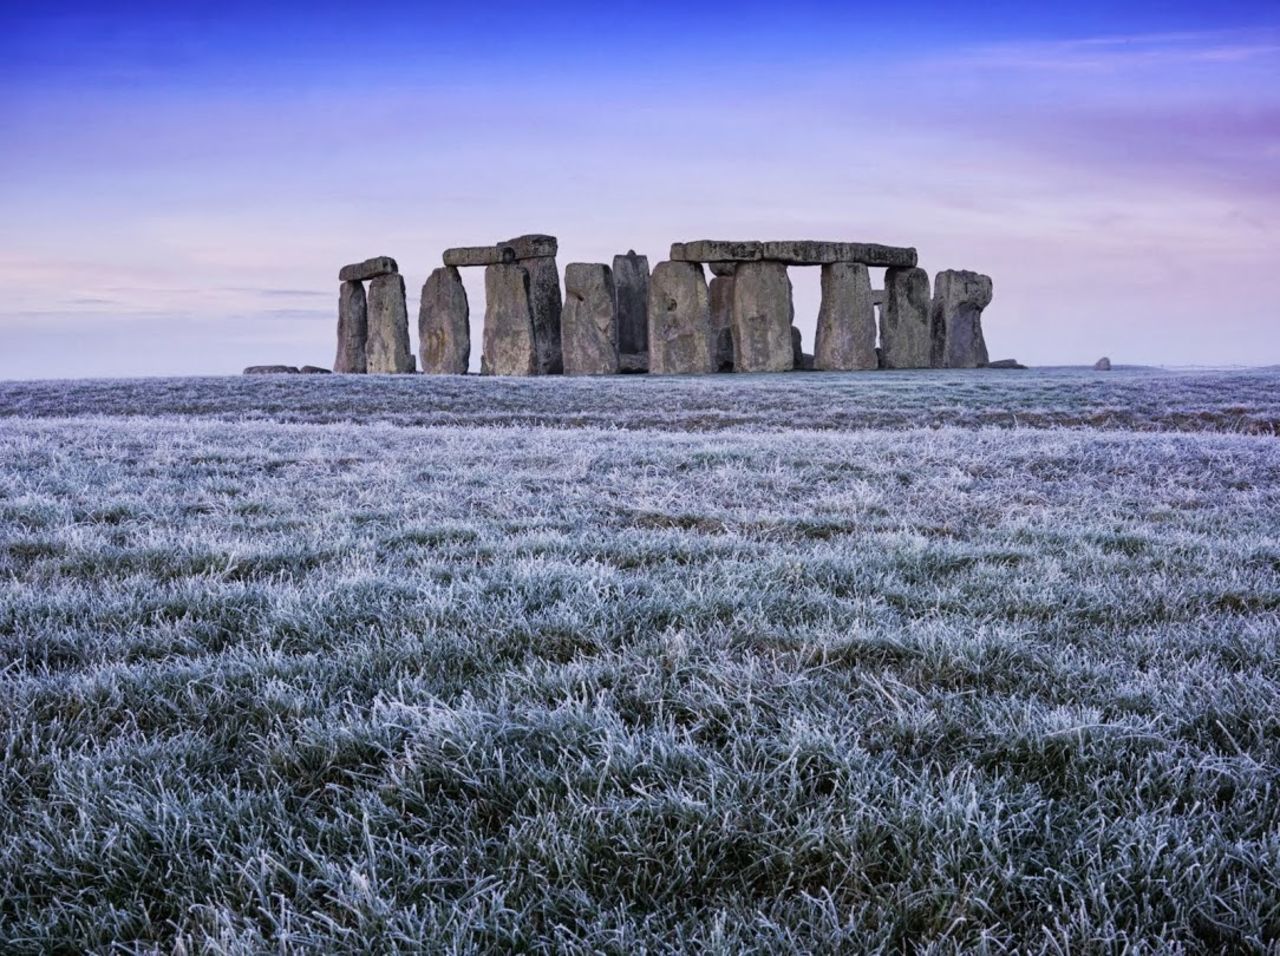 The $44 million overhaul of the ancient site is meant to transform visitors' experience of Stonehenge.